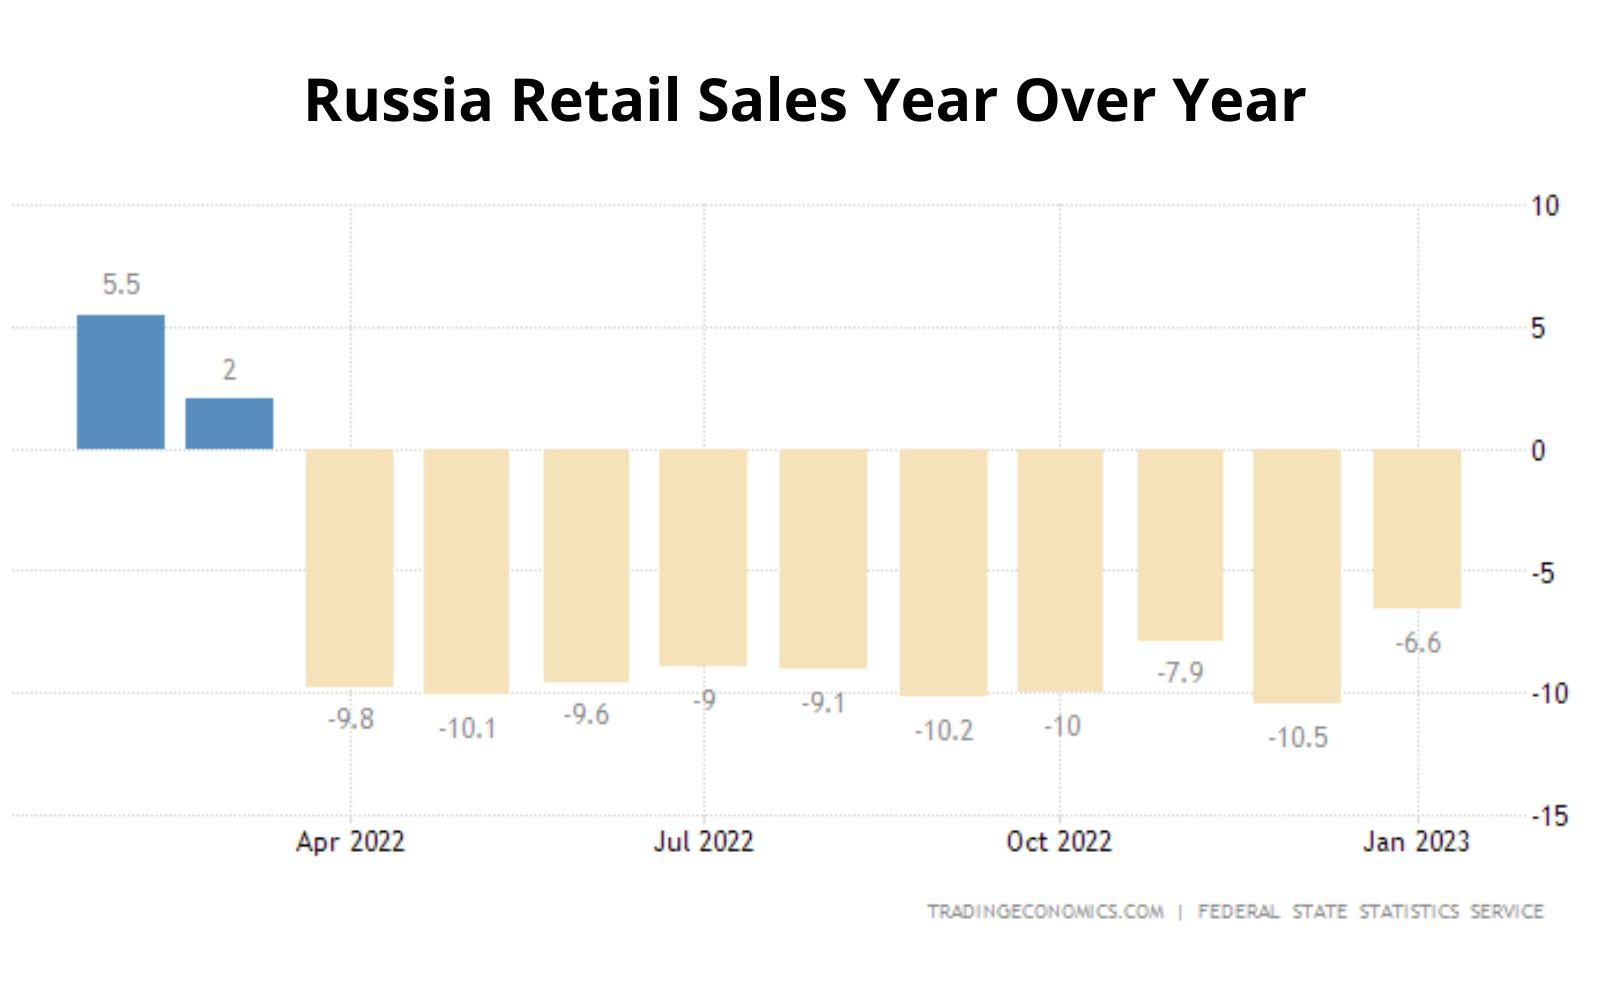 Russia retail sales